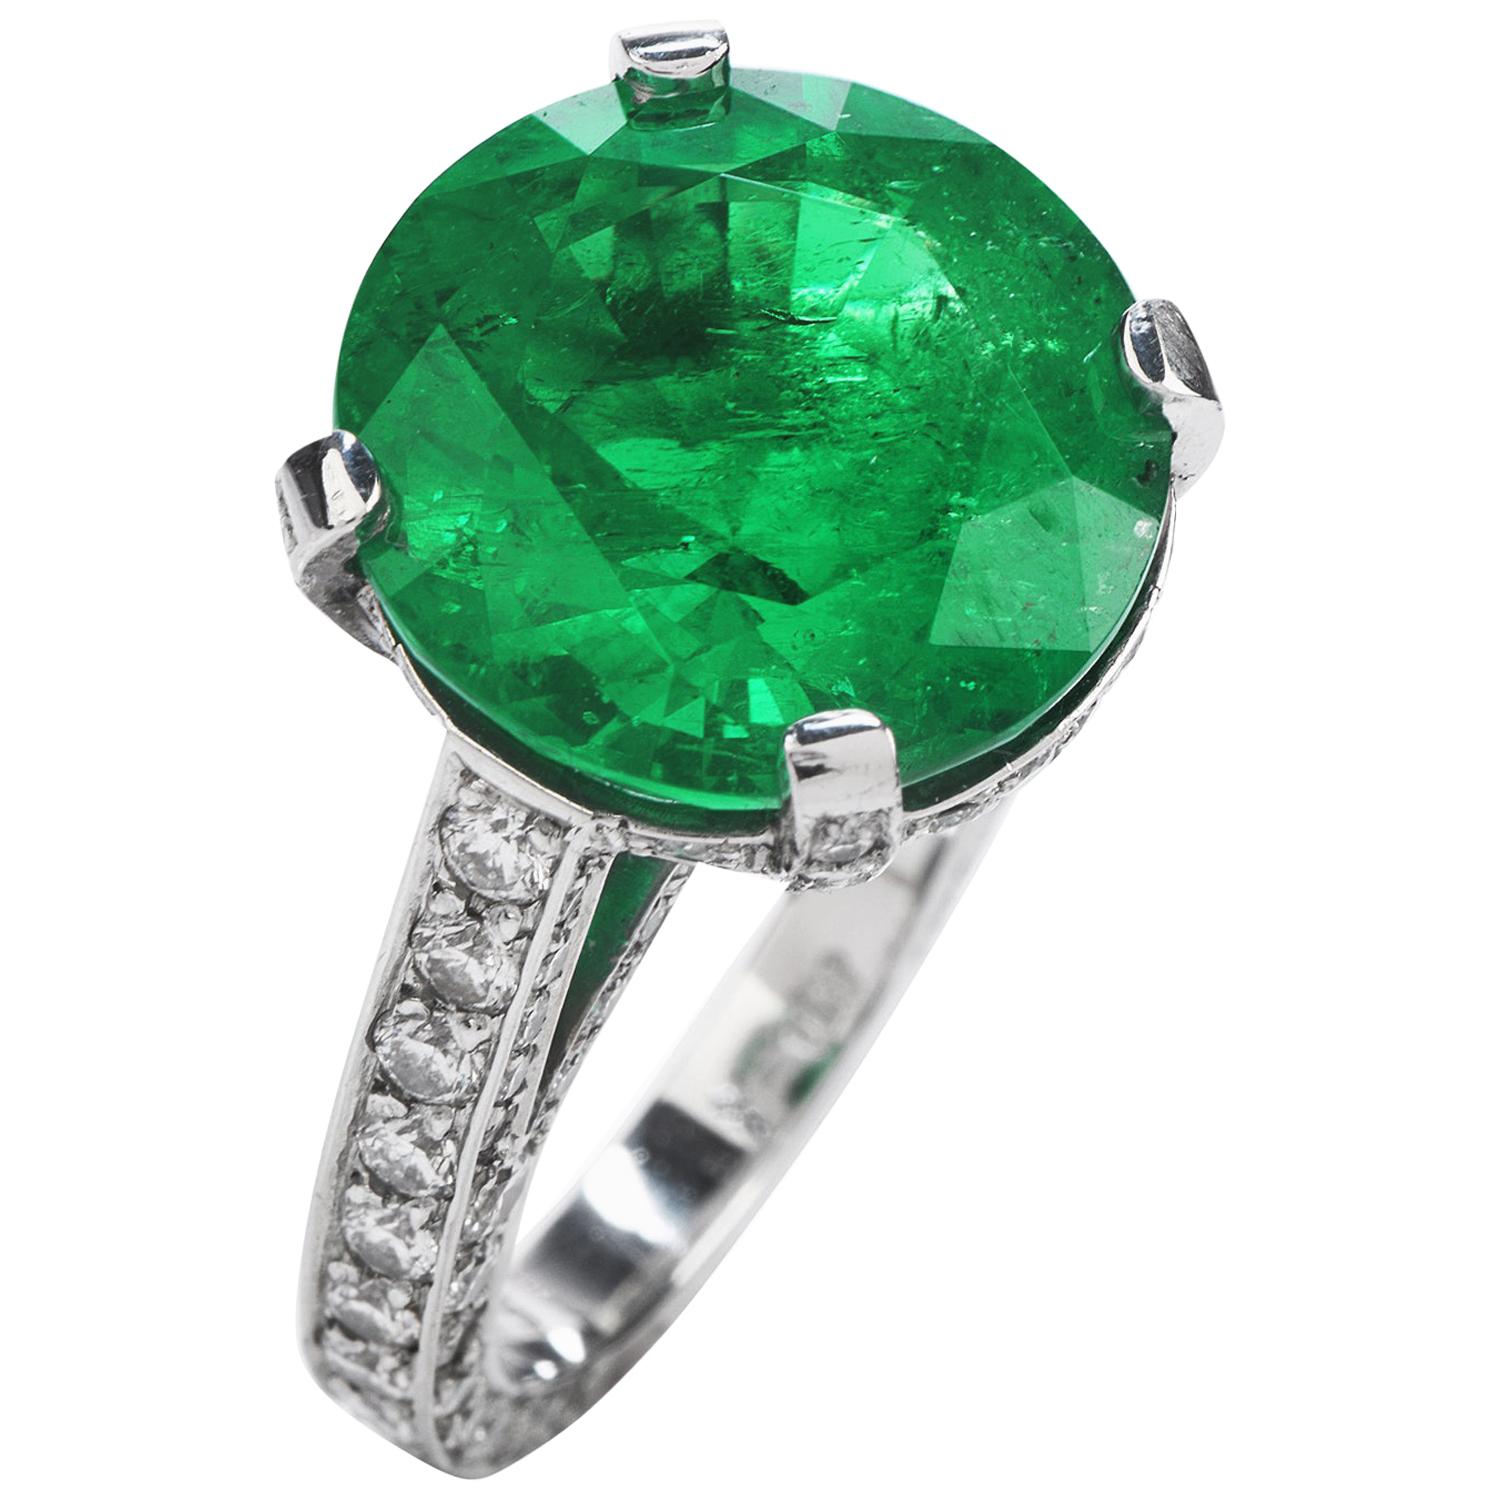 1990s Certified 8.13 Carat Colombian Emerald Diamond Platinum Cocktail Ring